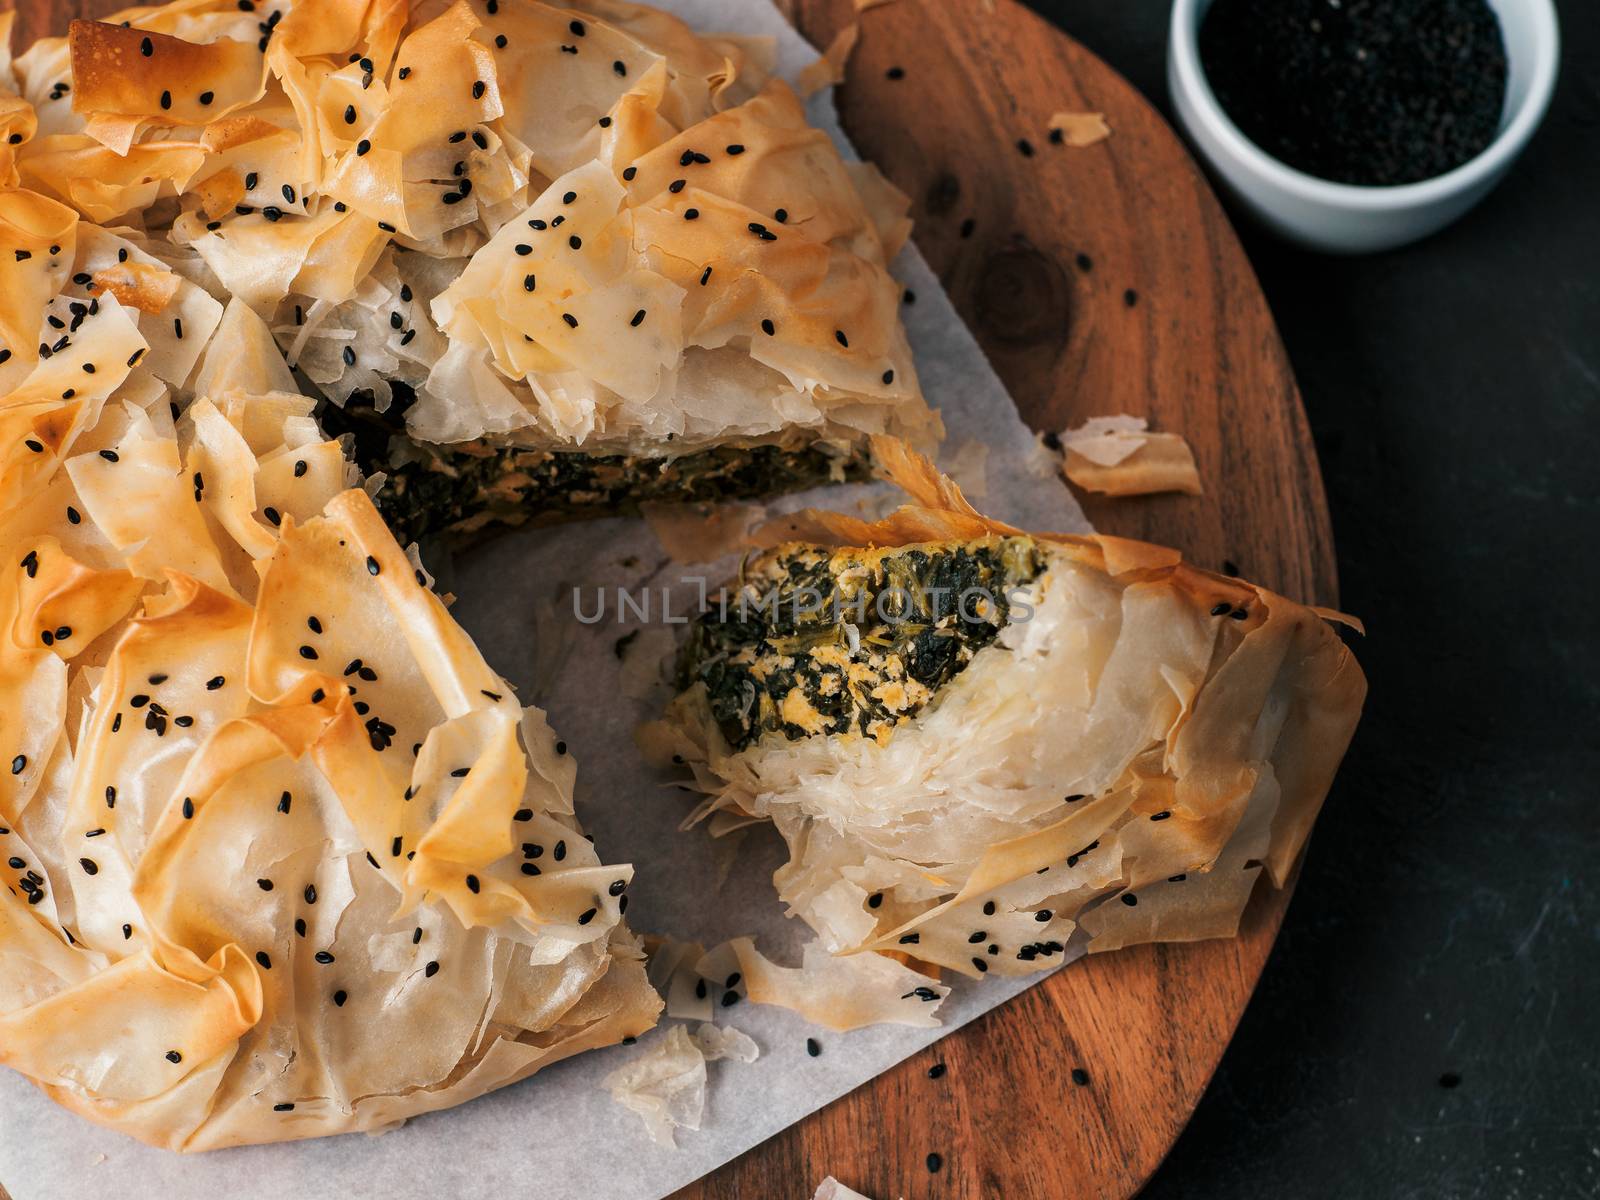 Greek pie spanakopita on dark background. Ideas and recipes for vegetarian or vegan Spanakopita Spinach Pie from fillo pastry cut in slices. Copy space. Top view or flat lay.